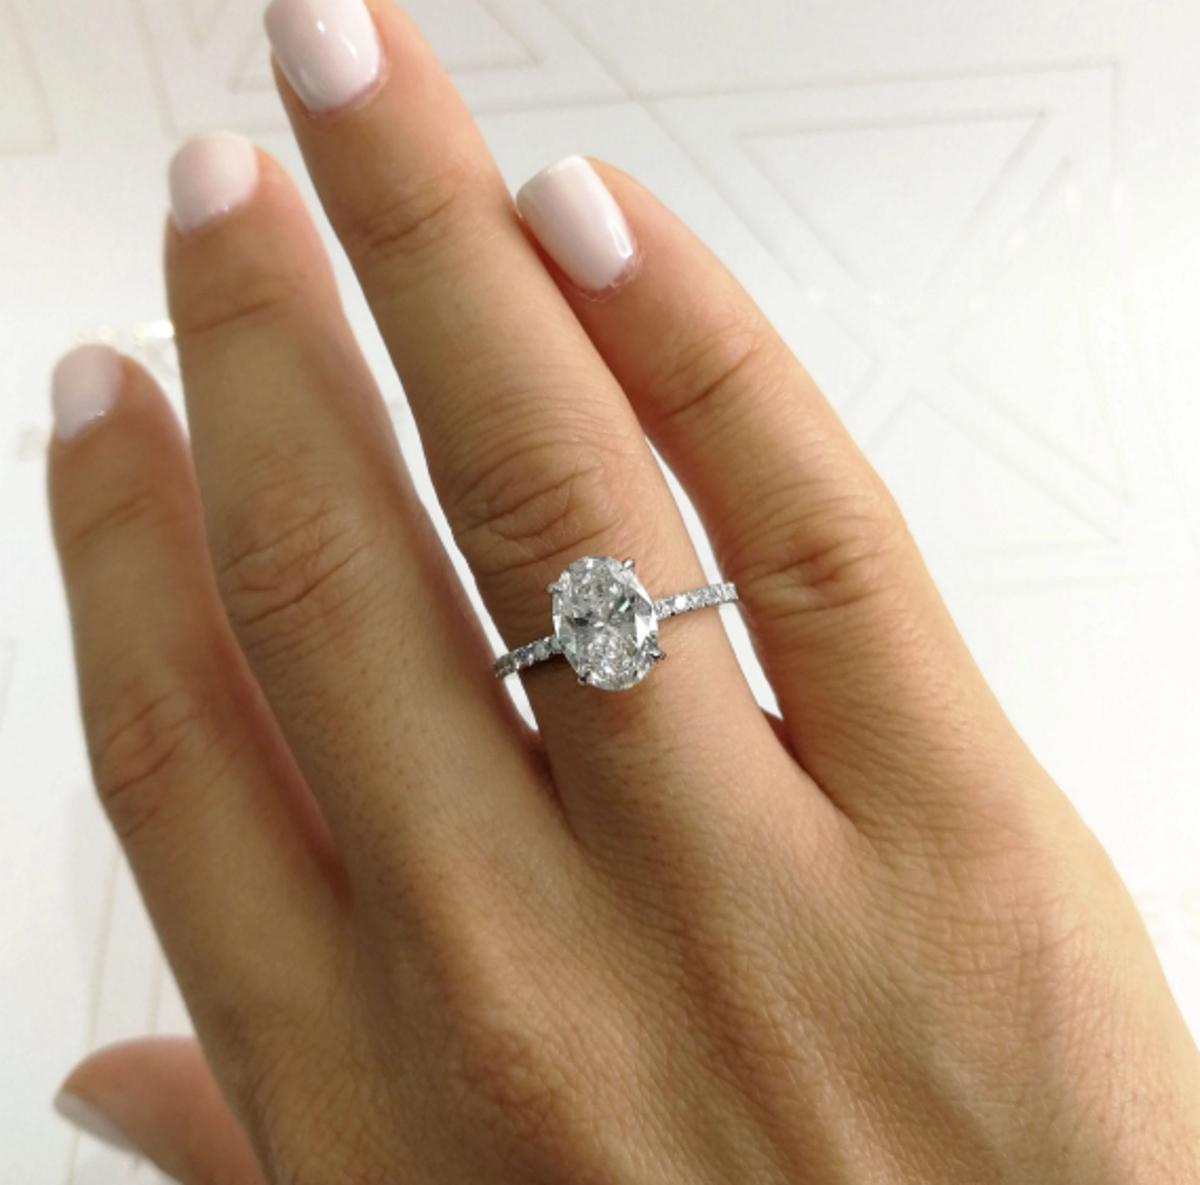 This eye-catching 2 Carat GIA certified oval cut diamond ring has perfect D color, a completely eye clean appearance, and gorgeous, lively brilliance! Oval cuts are one of the most fashionable and sought after diamond cuts, and its elongated shape